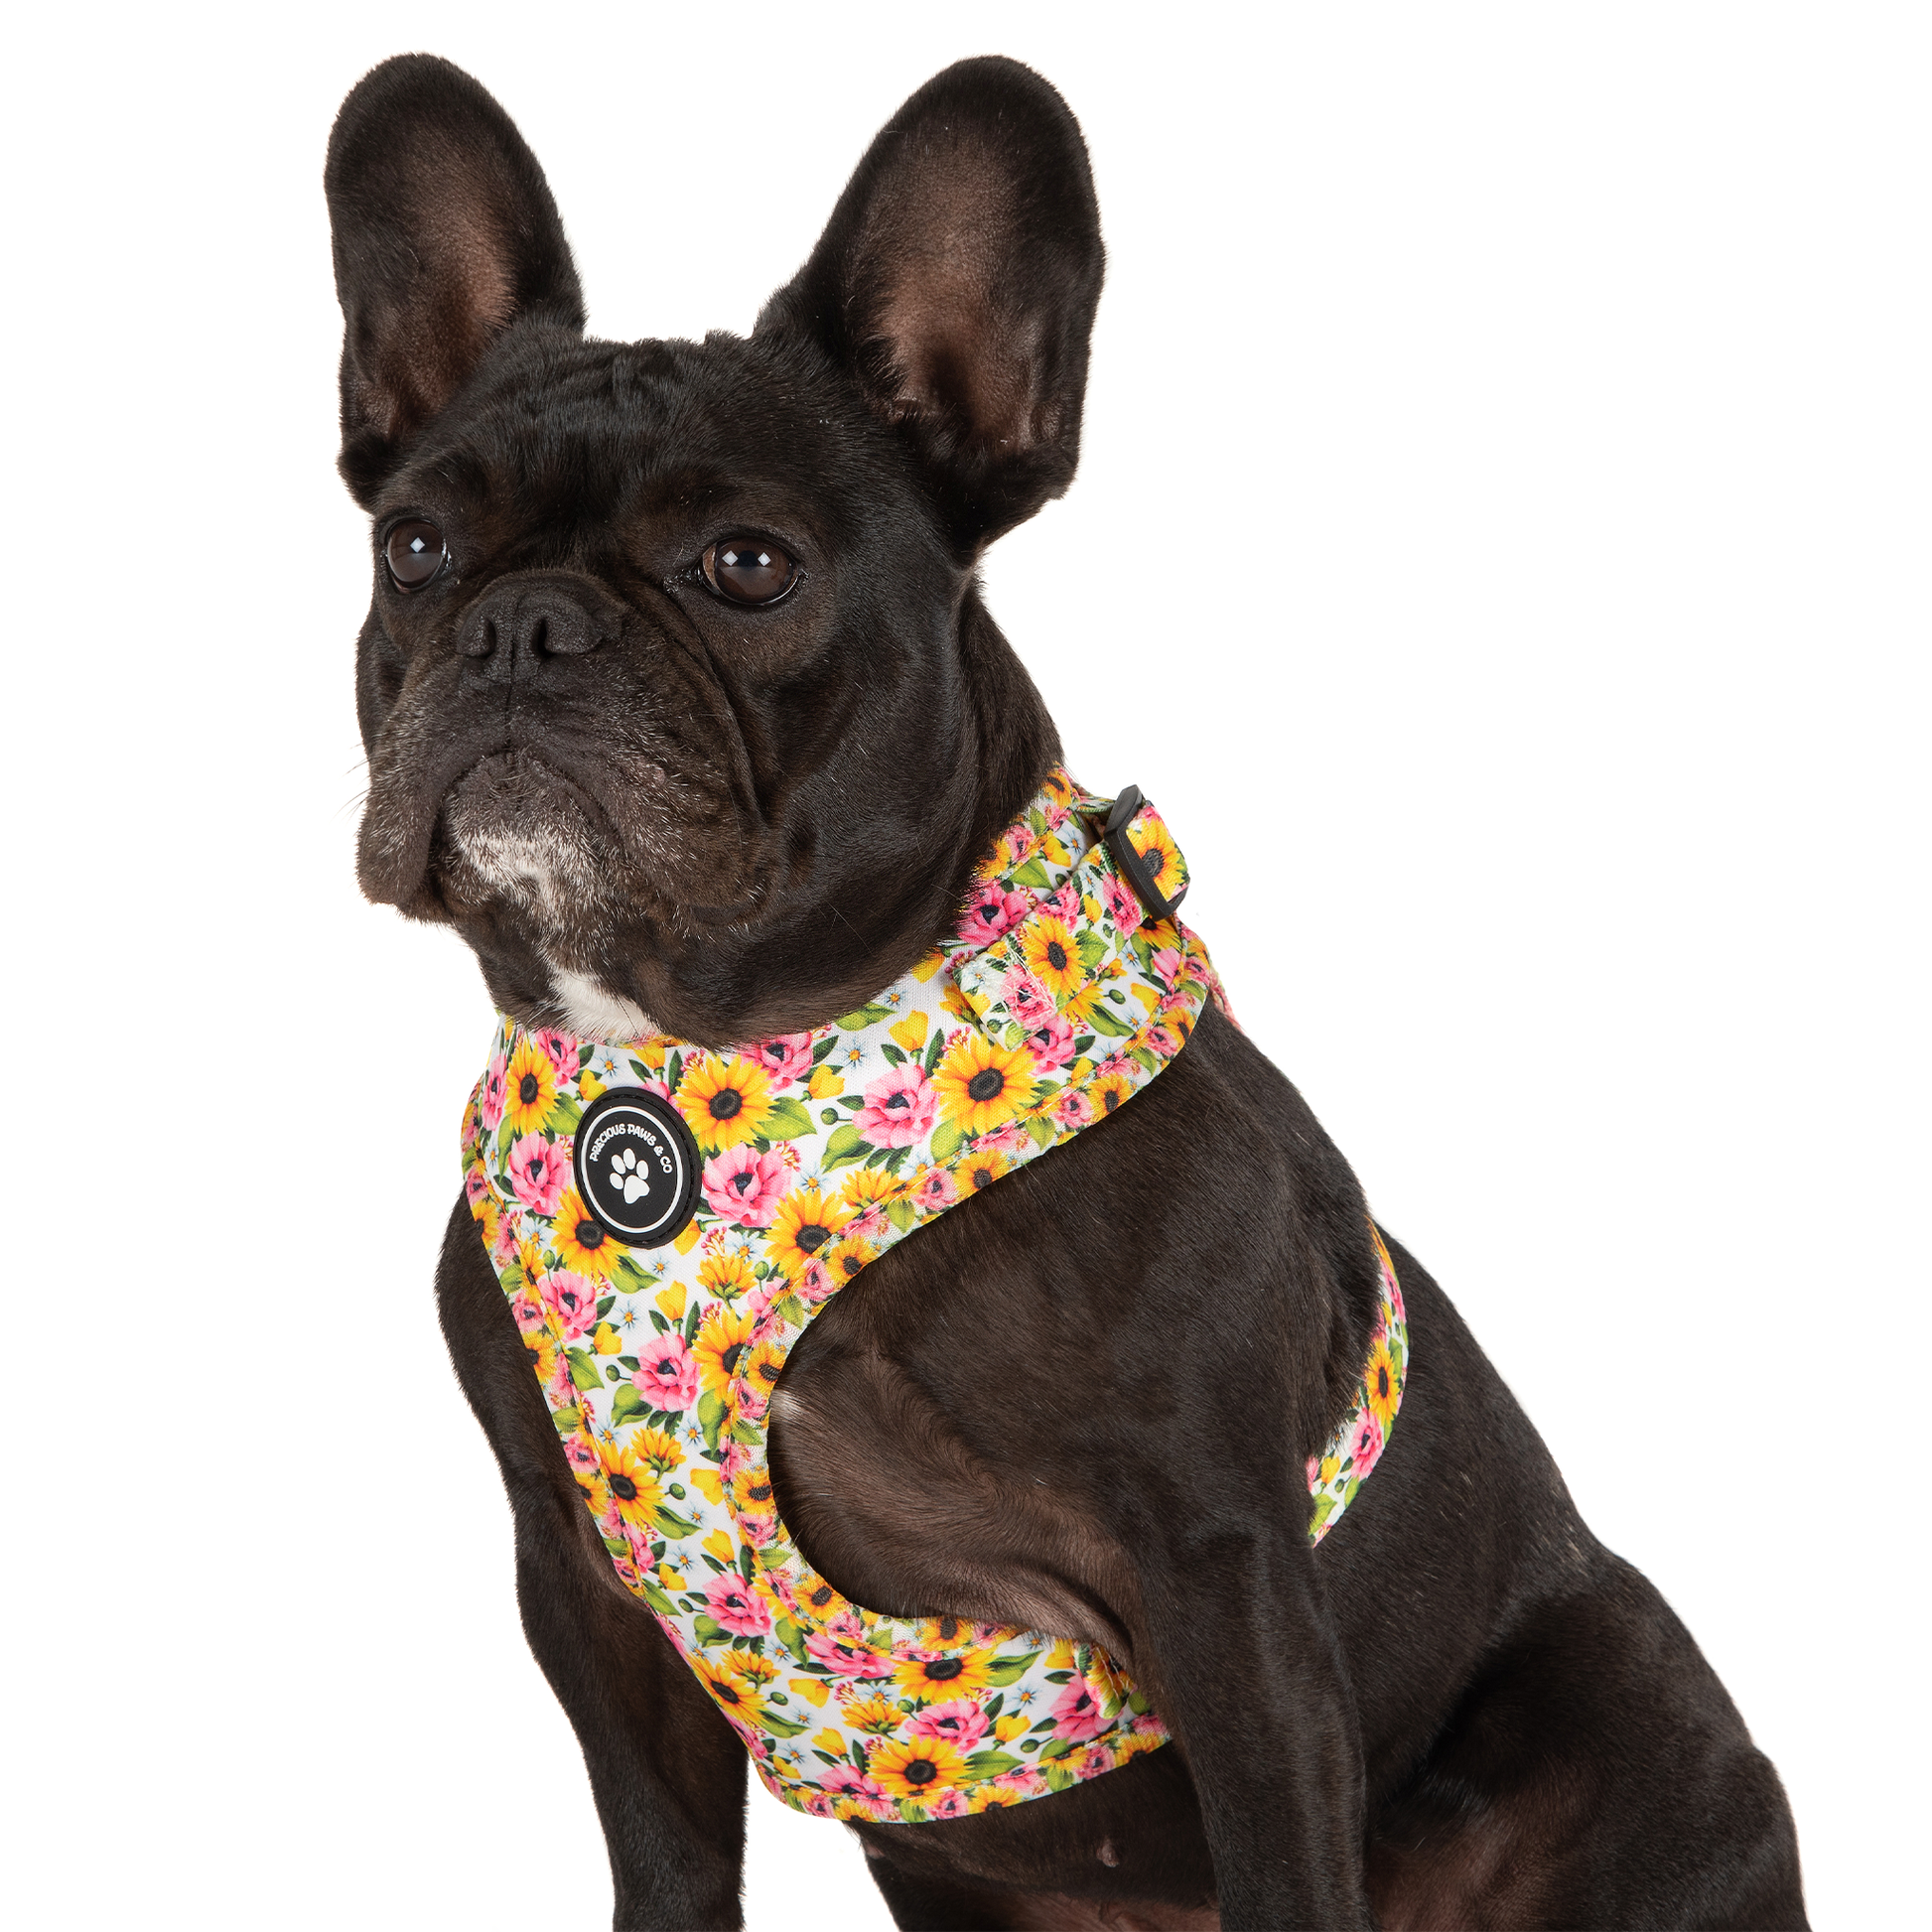 Dog Harness French Bulldogs, Dog Harness Small Dogs